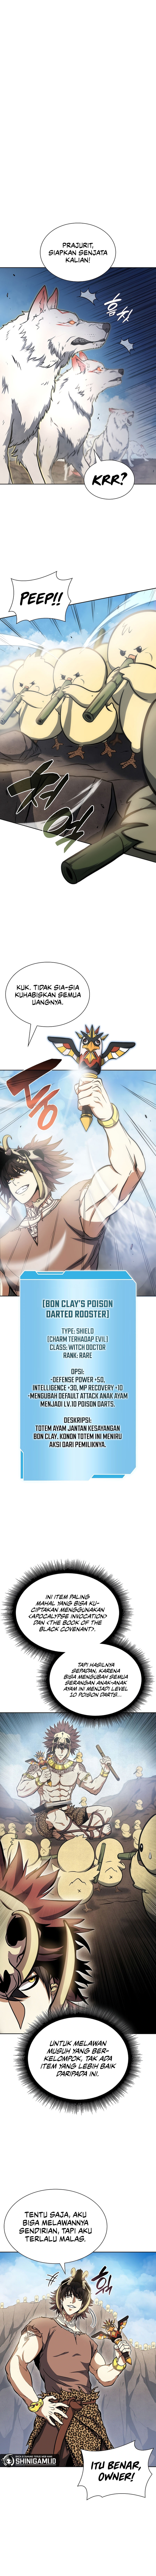 i-returned-as-an-fff-class-witch-doctor Chapter 22